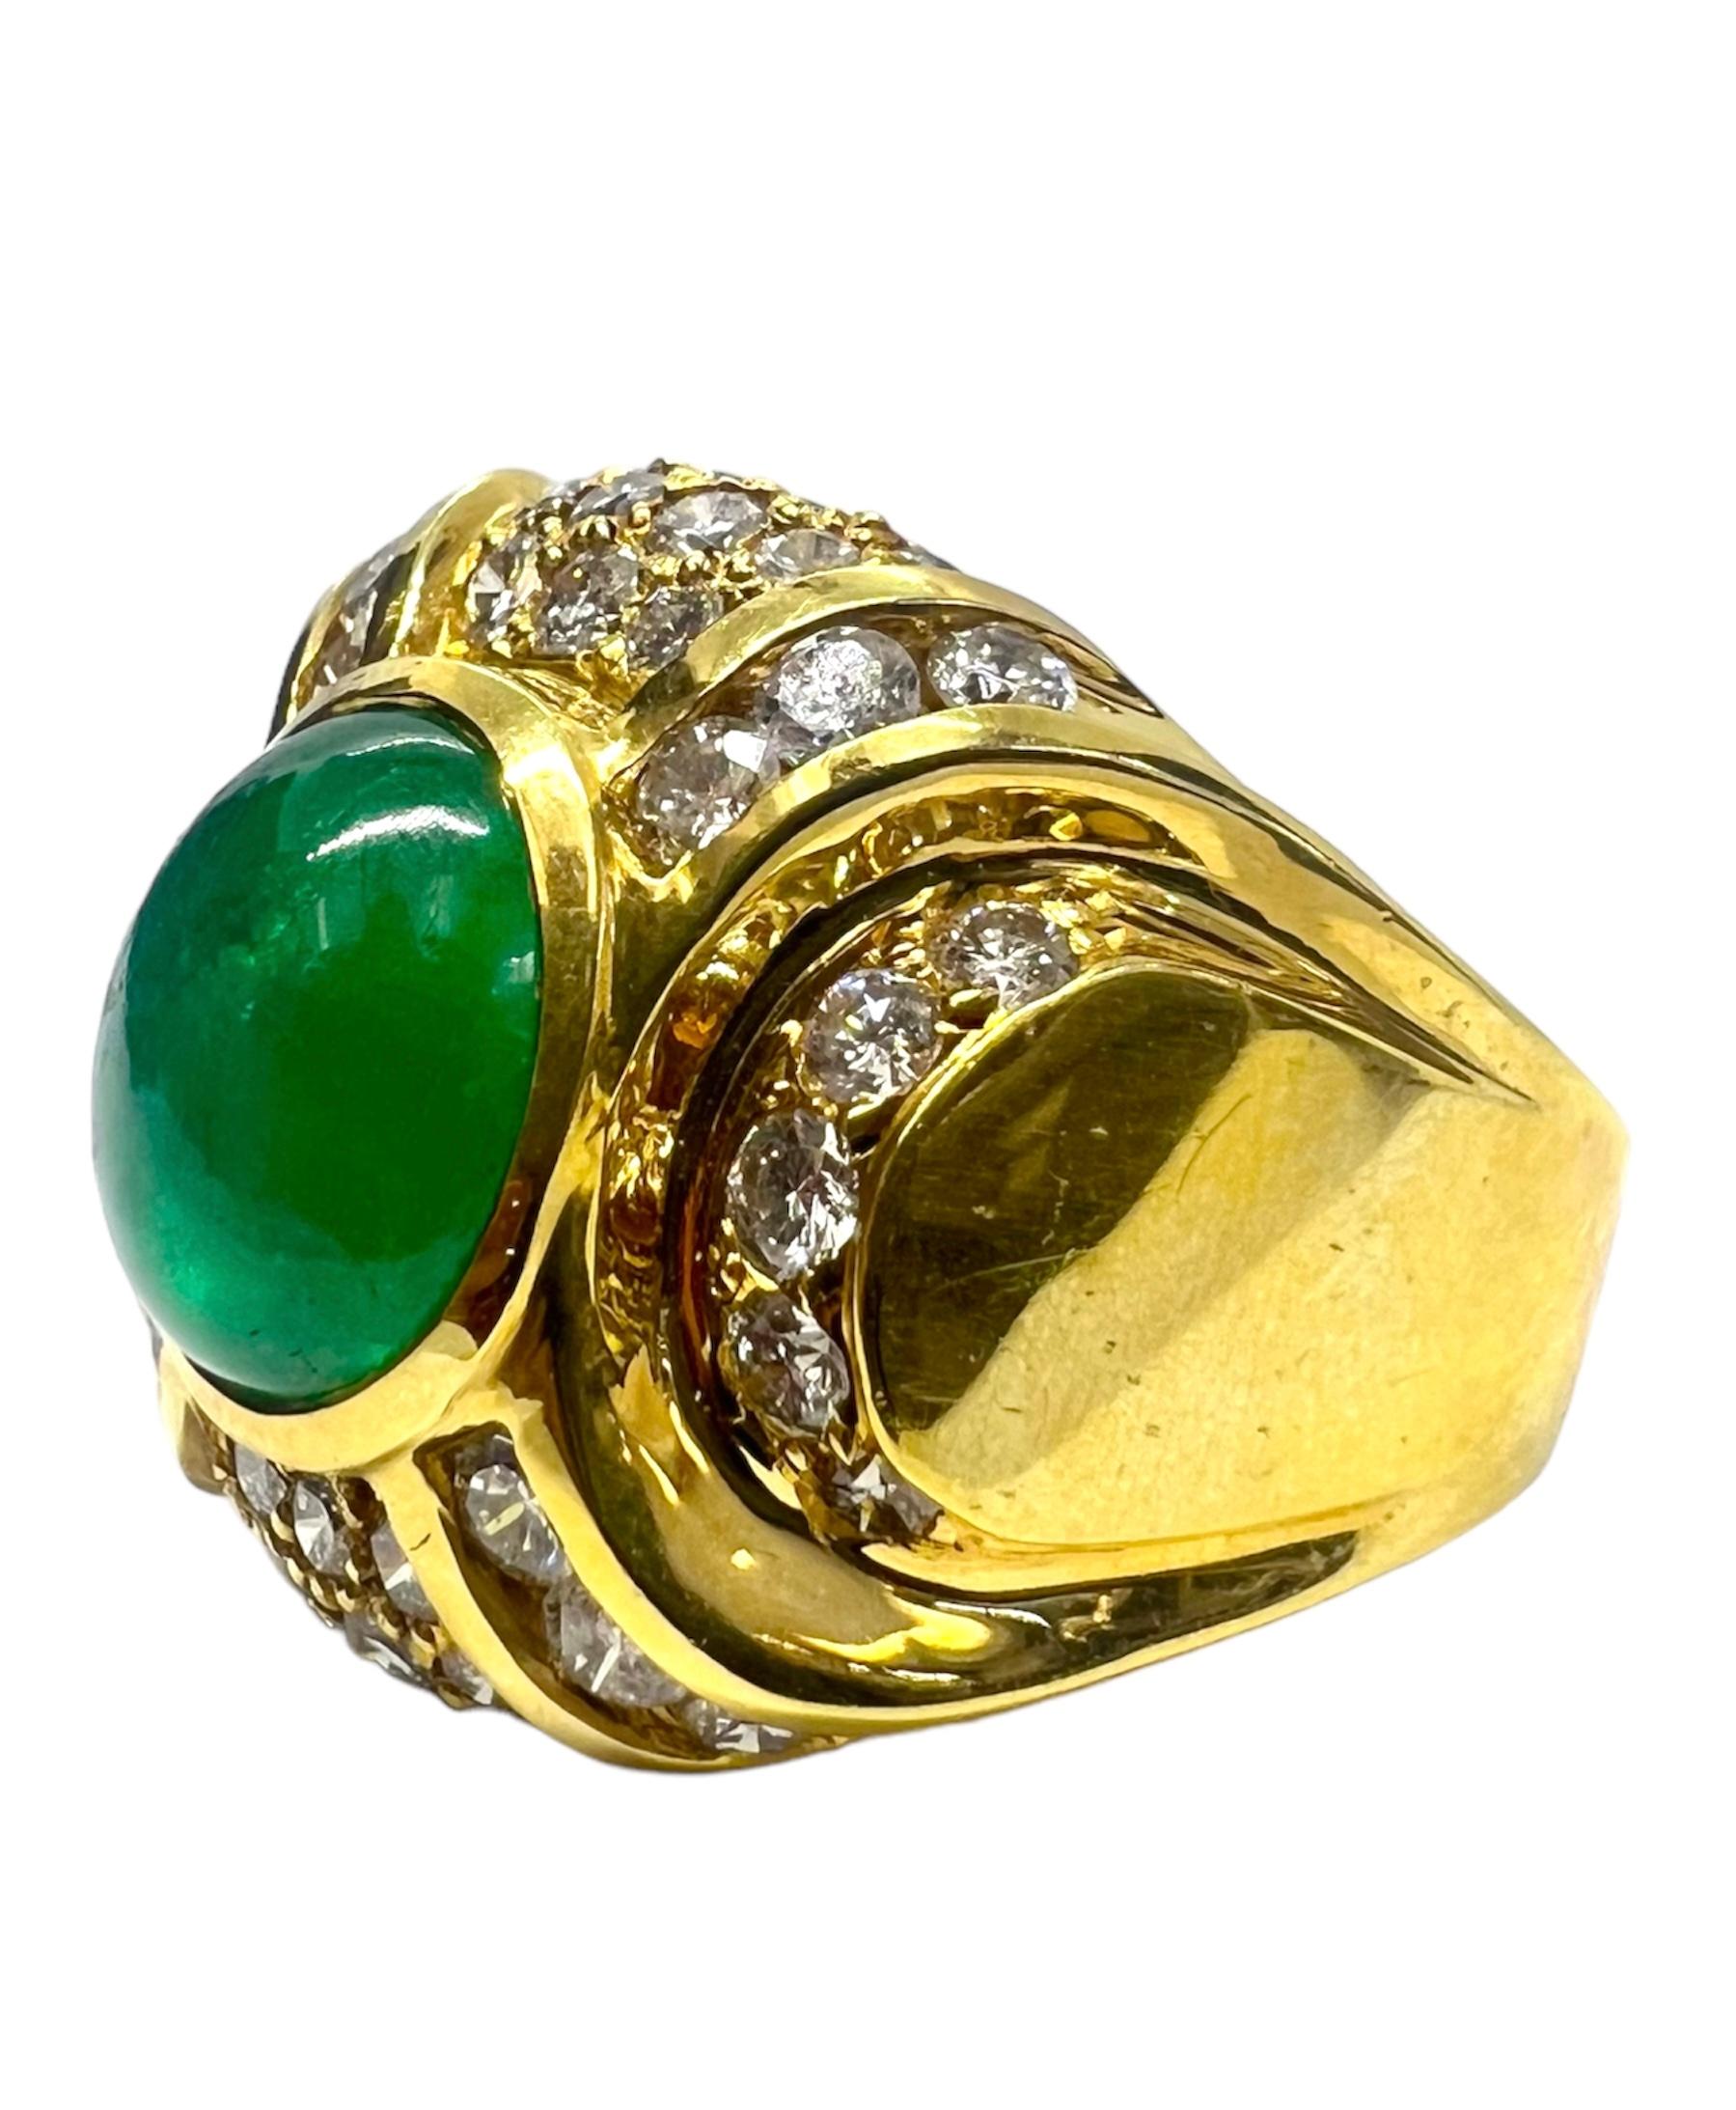 18K yellow gold ring with cabochon emerald center stone accented with diamonds.

Sophia D by Joseph Dardashti LTD has been known worldwide for 35 years and are inspired by classic Art Deco design that merges with modern manufacturing techniques.